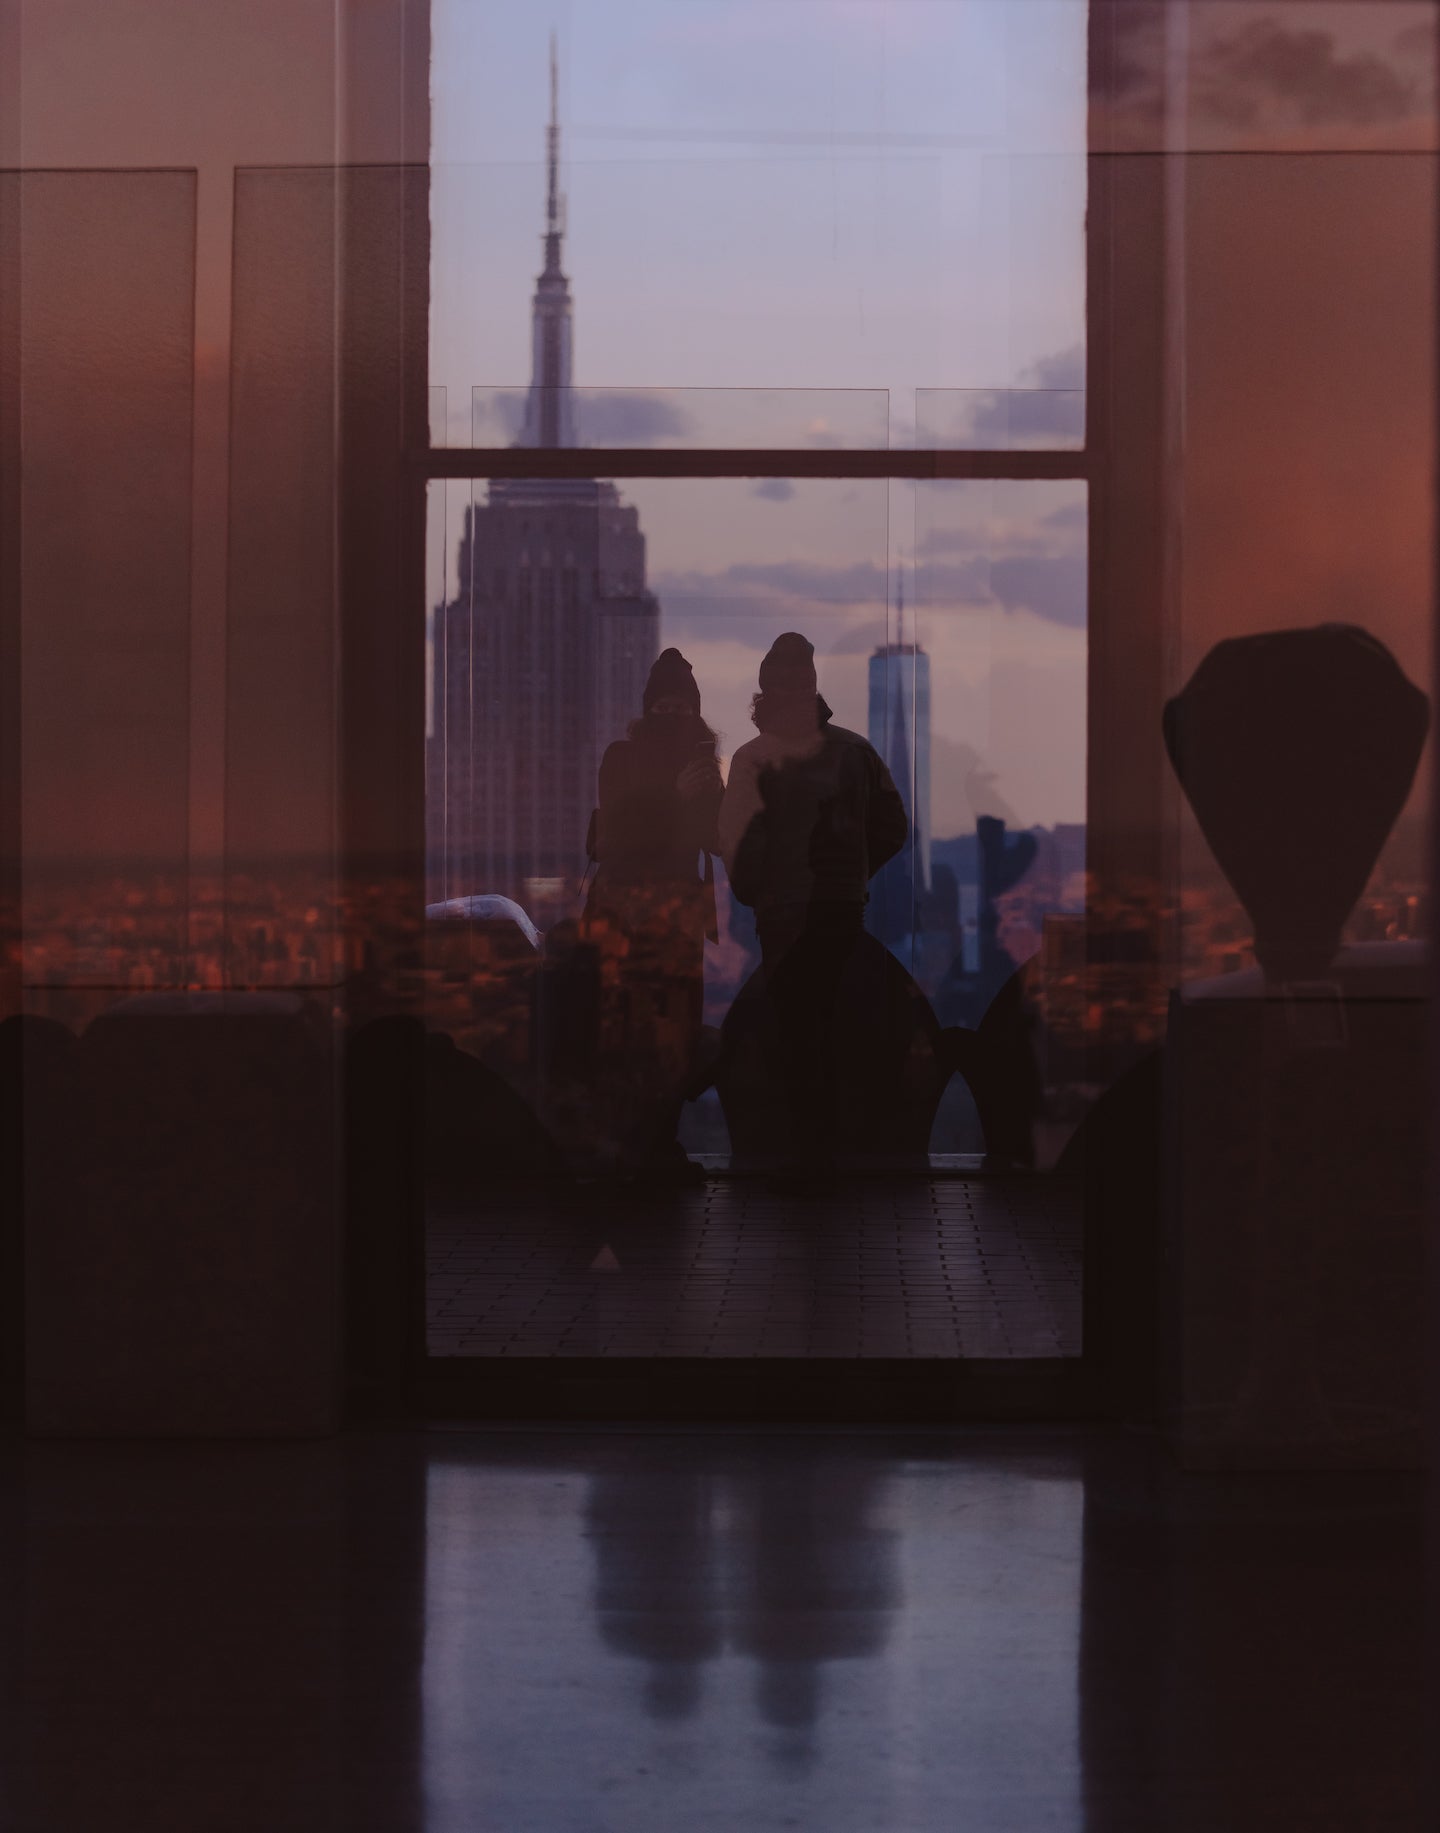 lovers and the empire state building